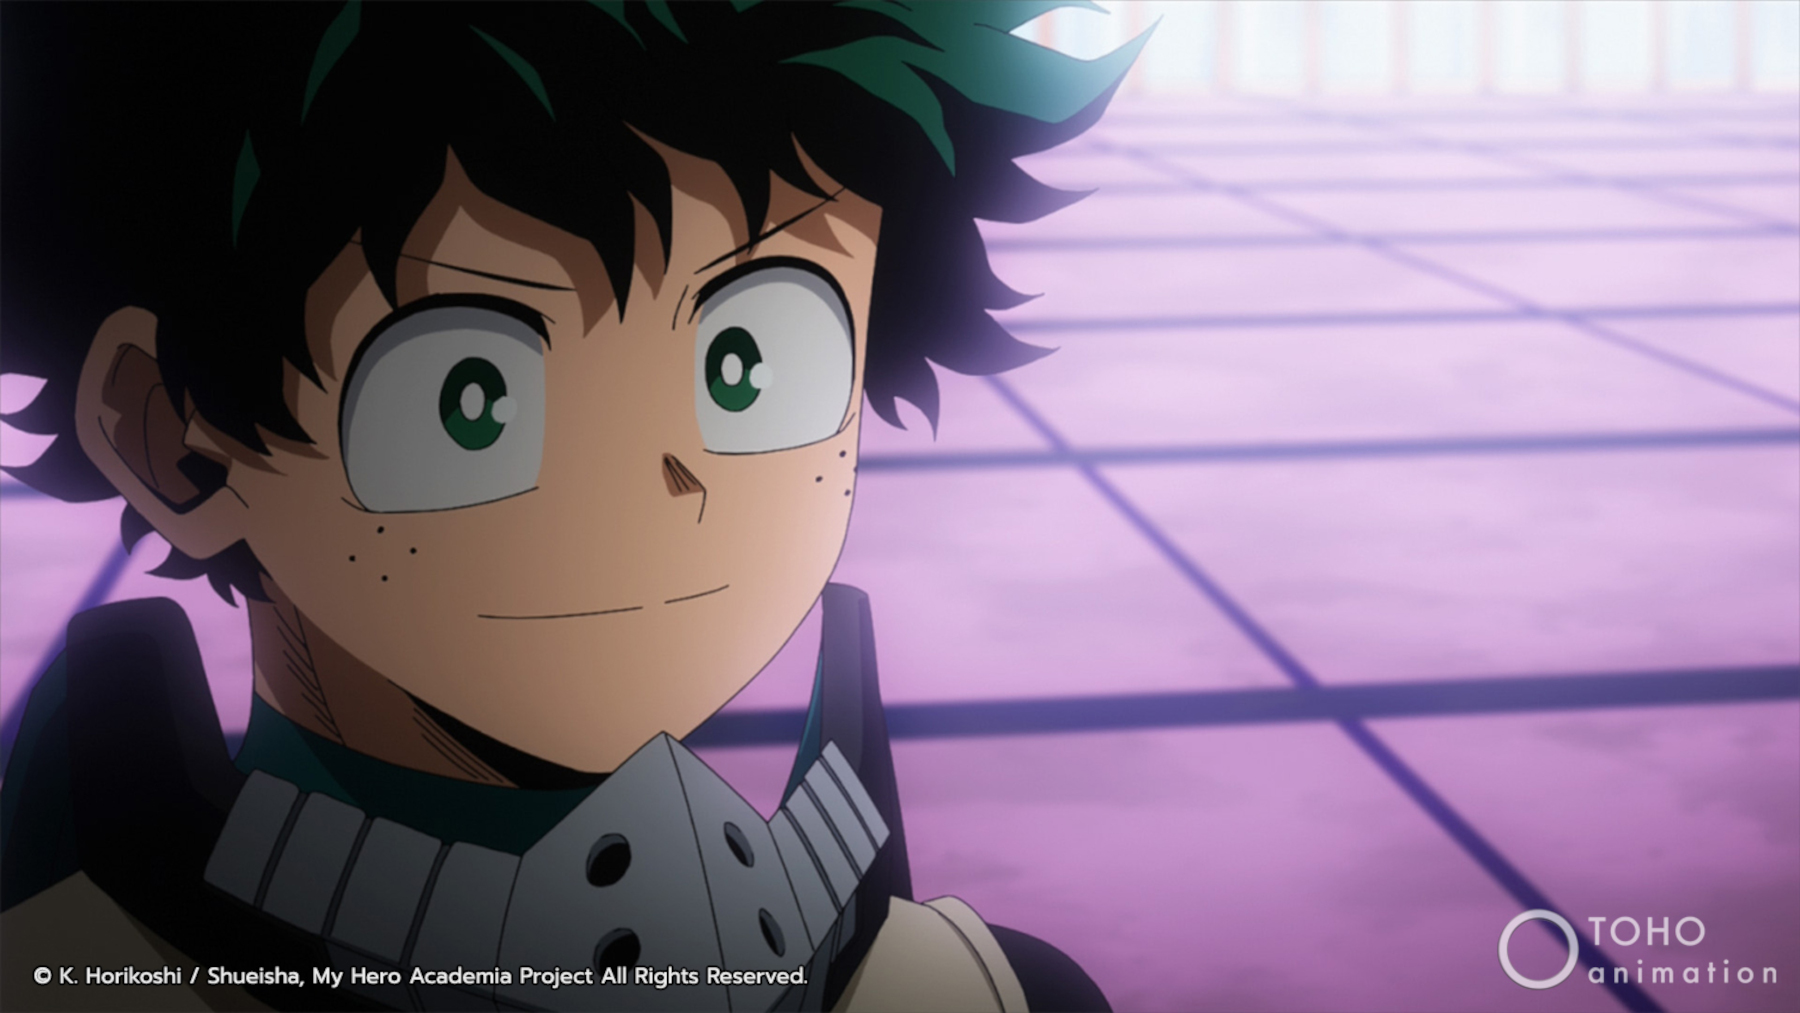 Deku in 'My Hero Academia' for our article about his doctor. He's standing on a purple, tiled floor and smiling.